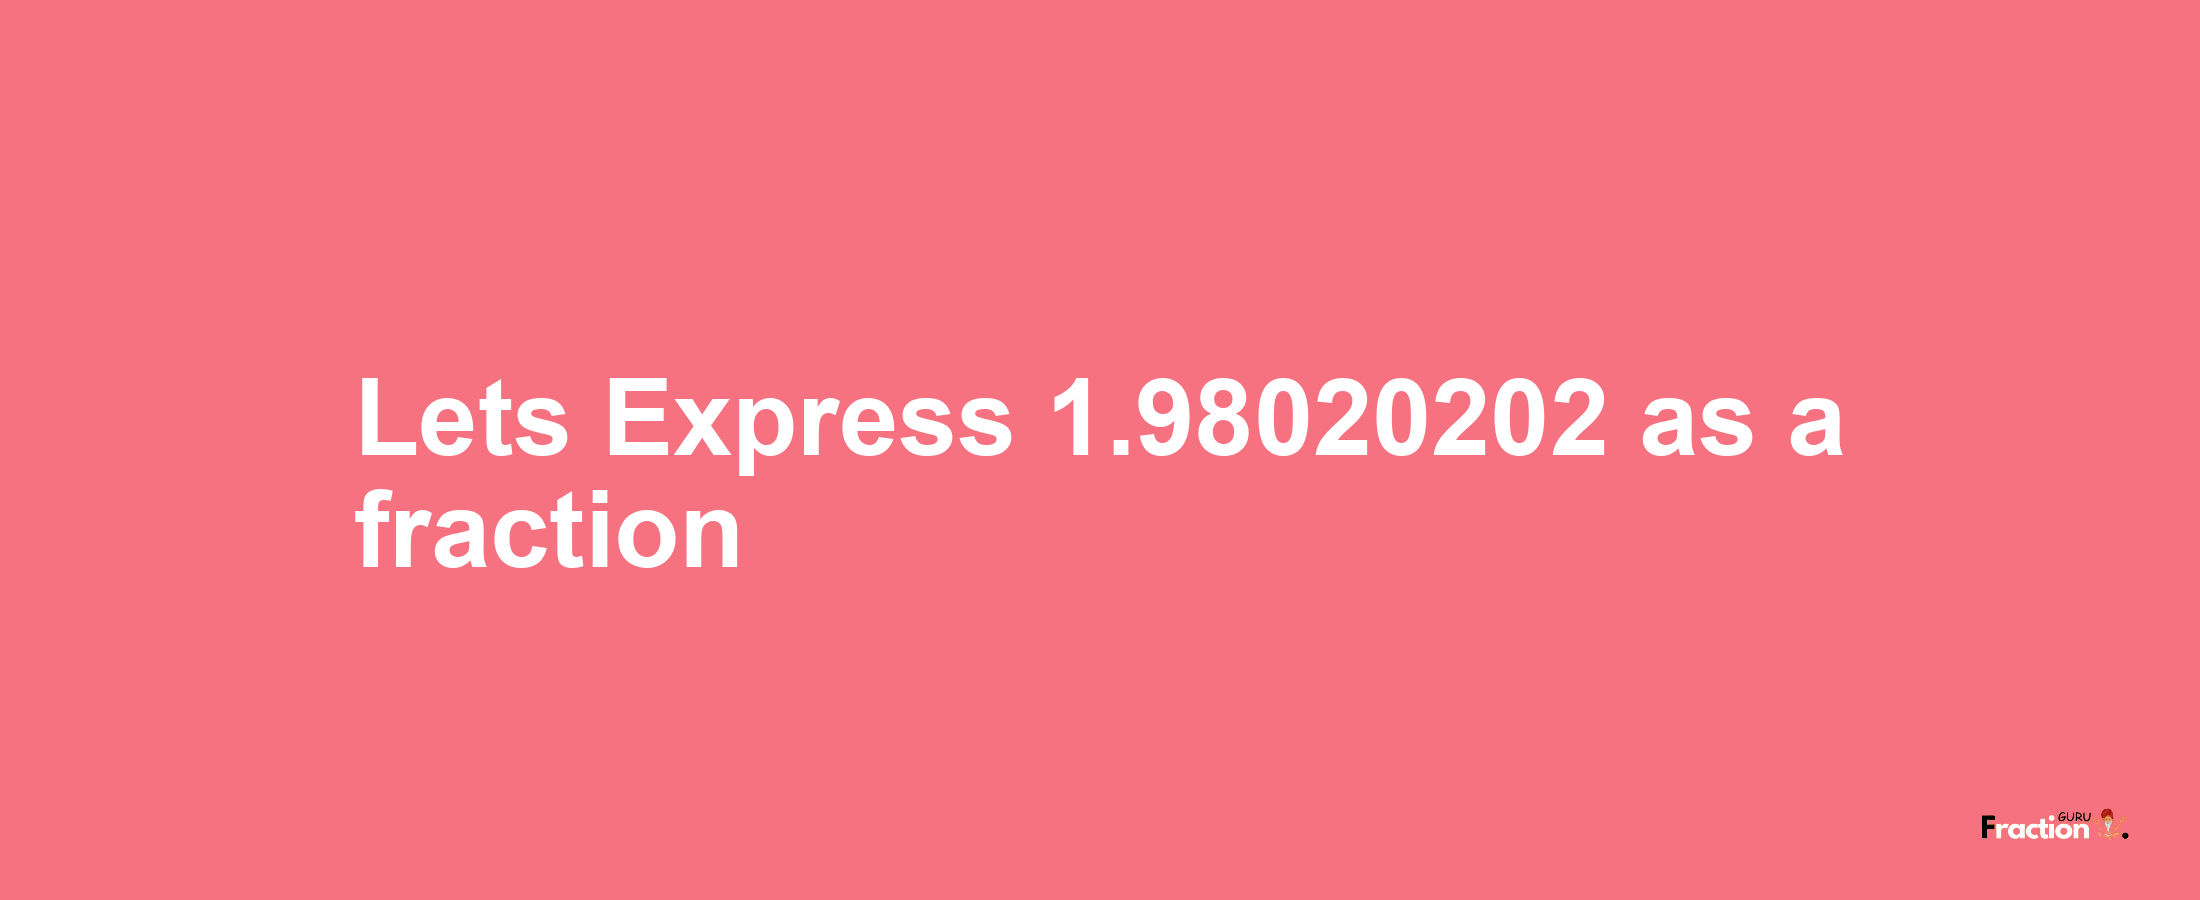 Lets Express 1.98020202 as afraction